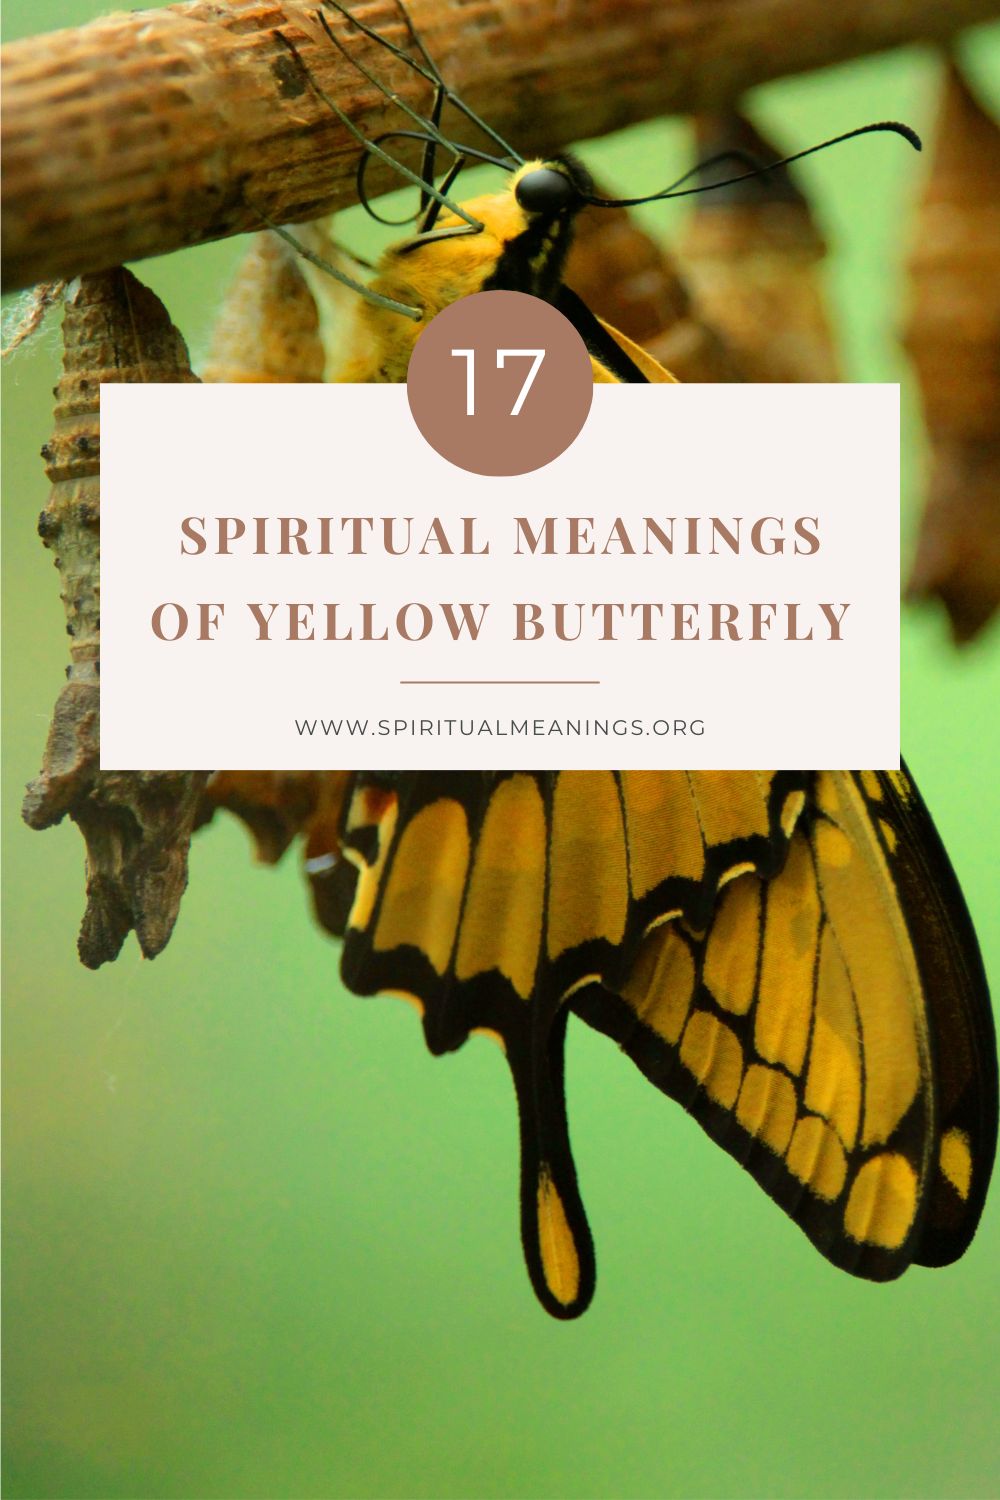 17 Spiritual Meanings of Yellow Butterfly - SpiritualMeanings.org